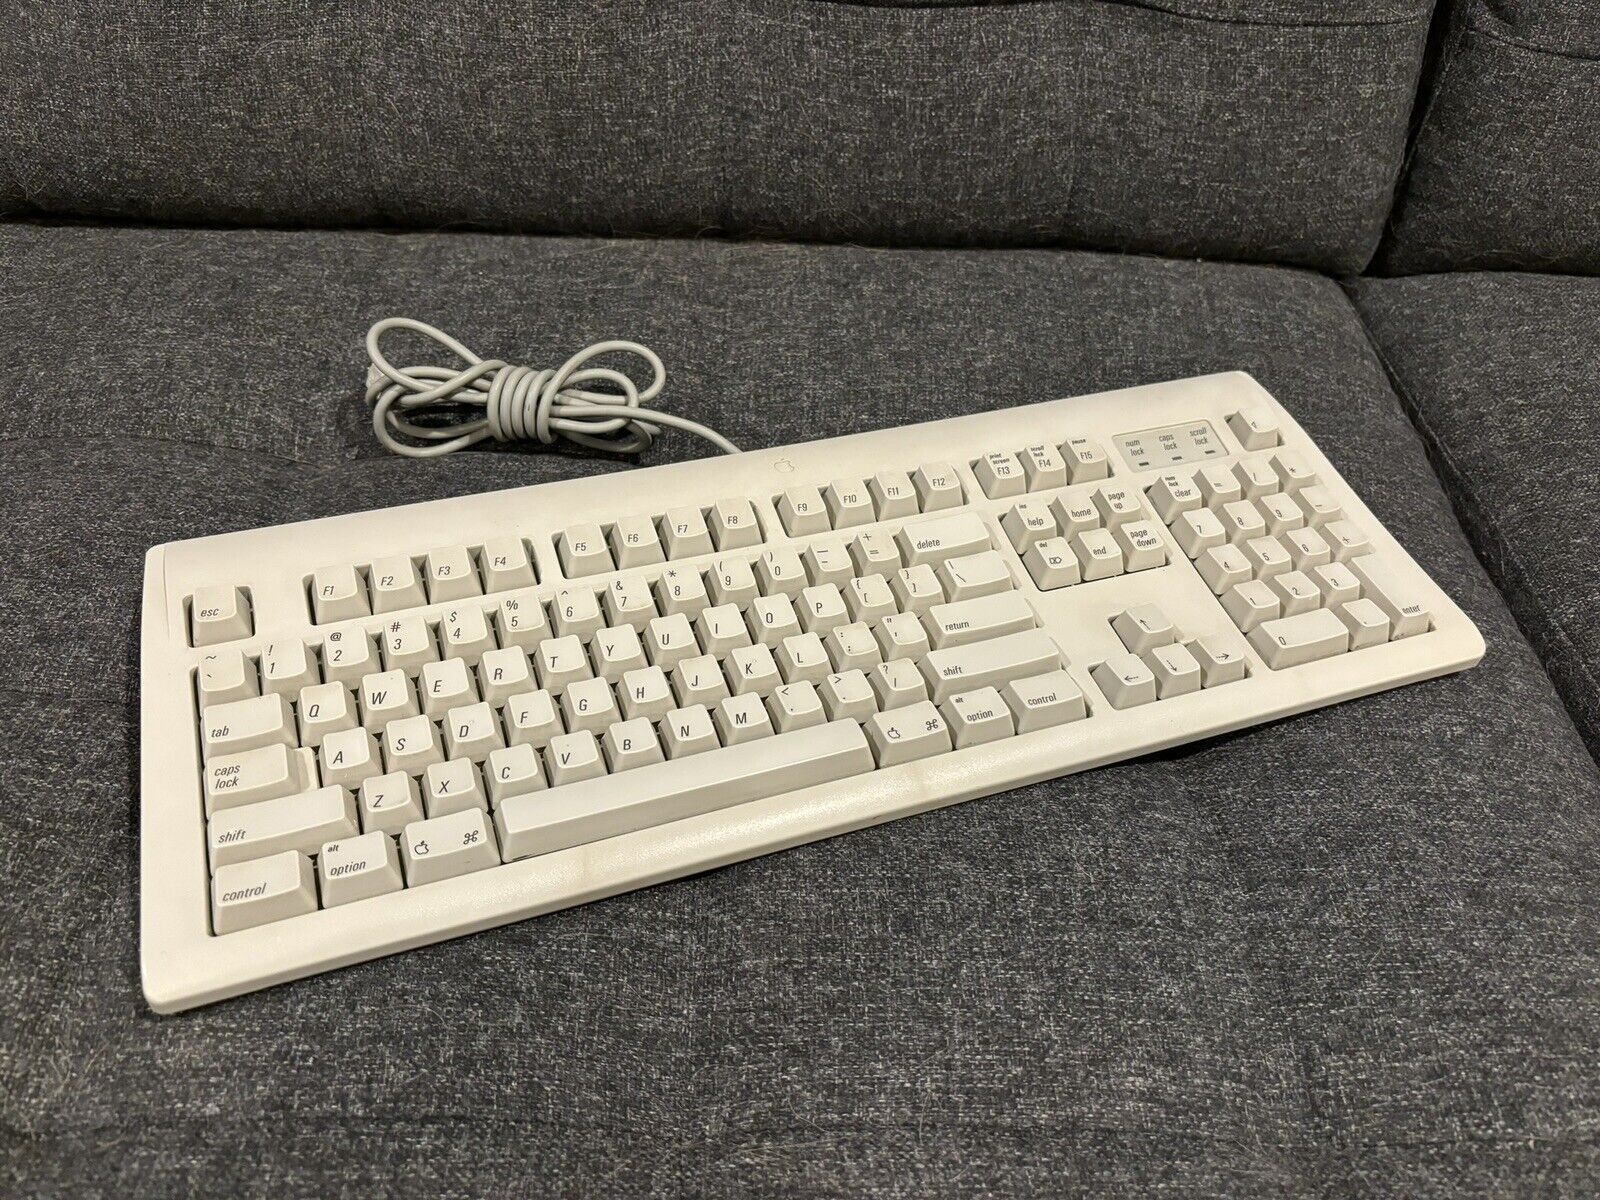 Vintage AppleDesign Keyboard M2980 ADB, Excellent Condition, AS-IS